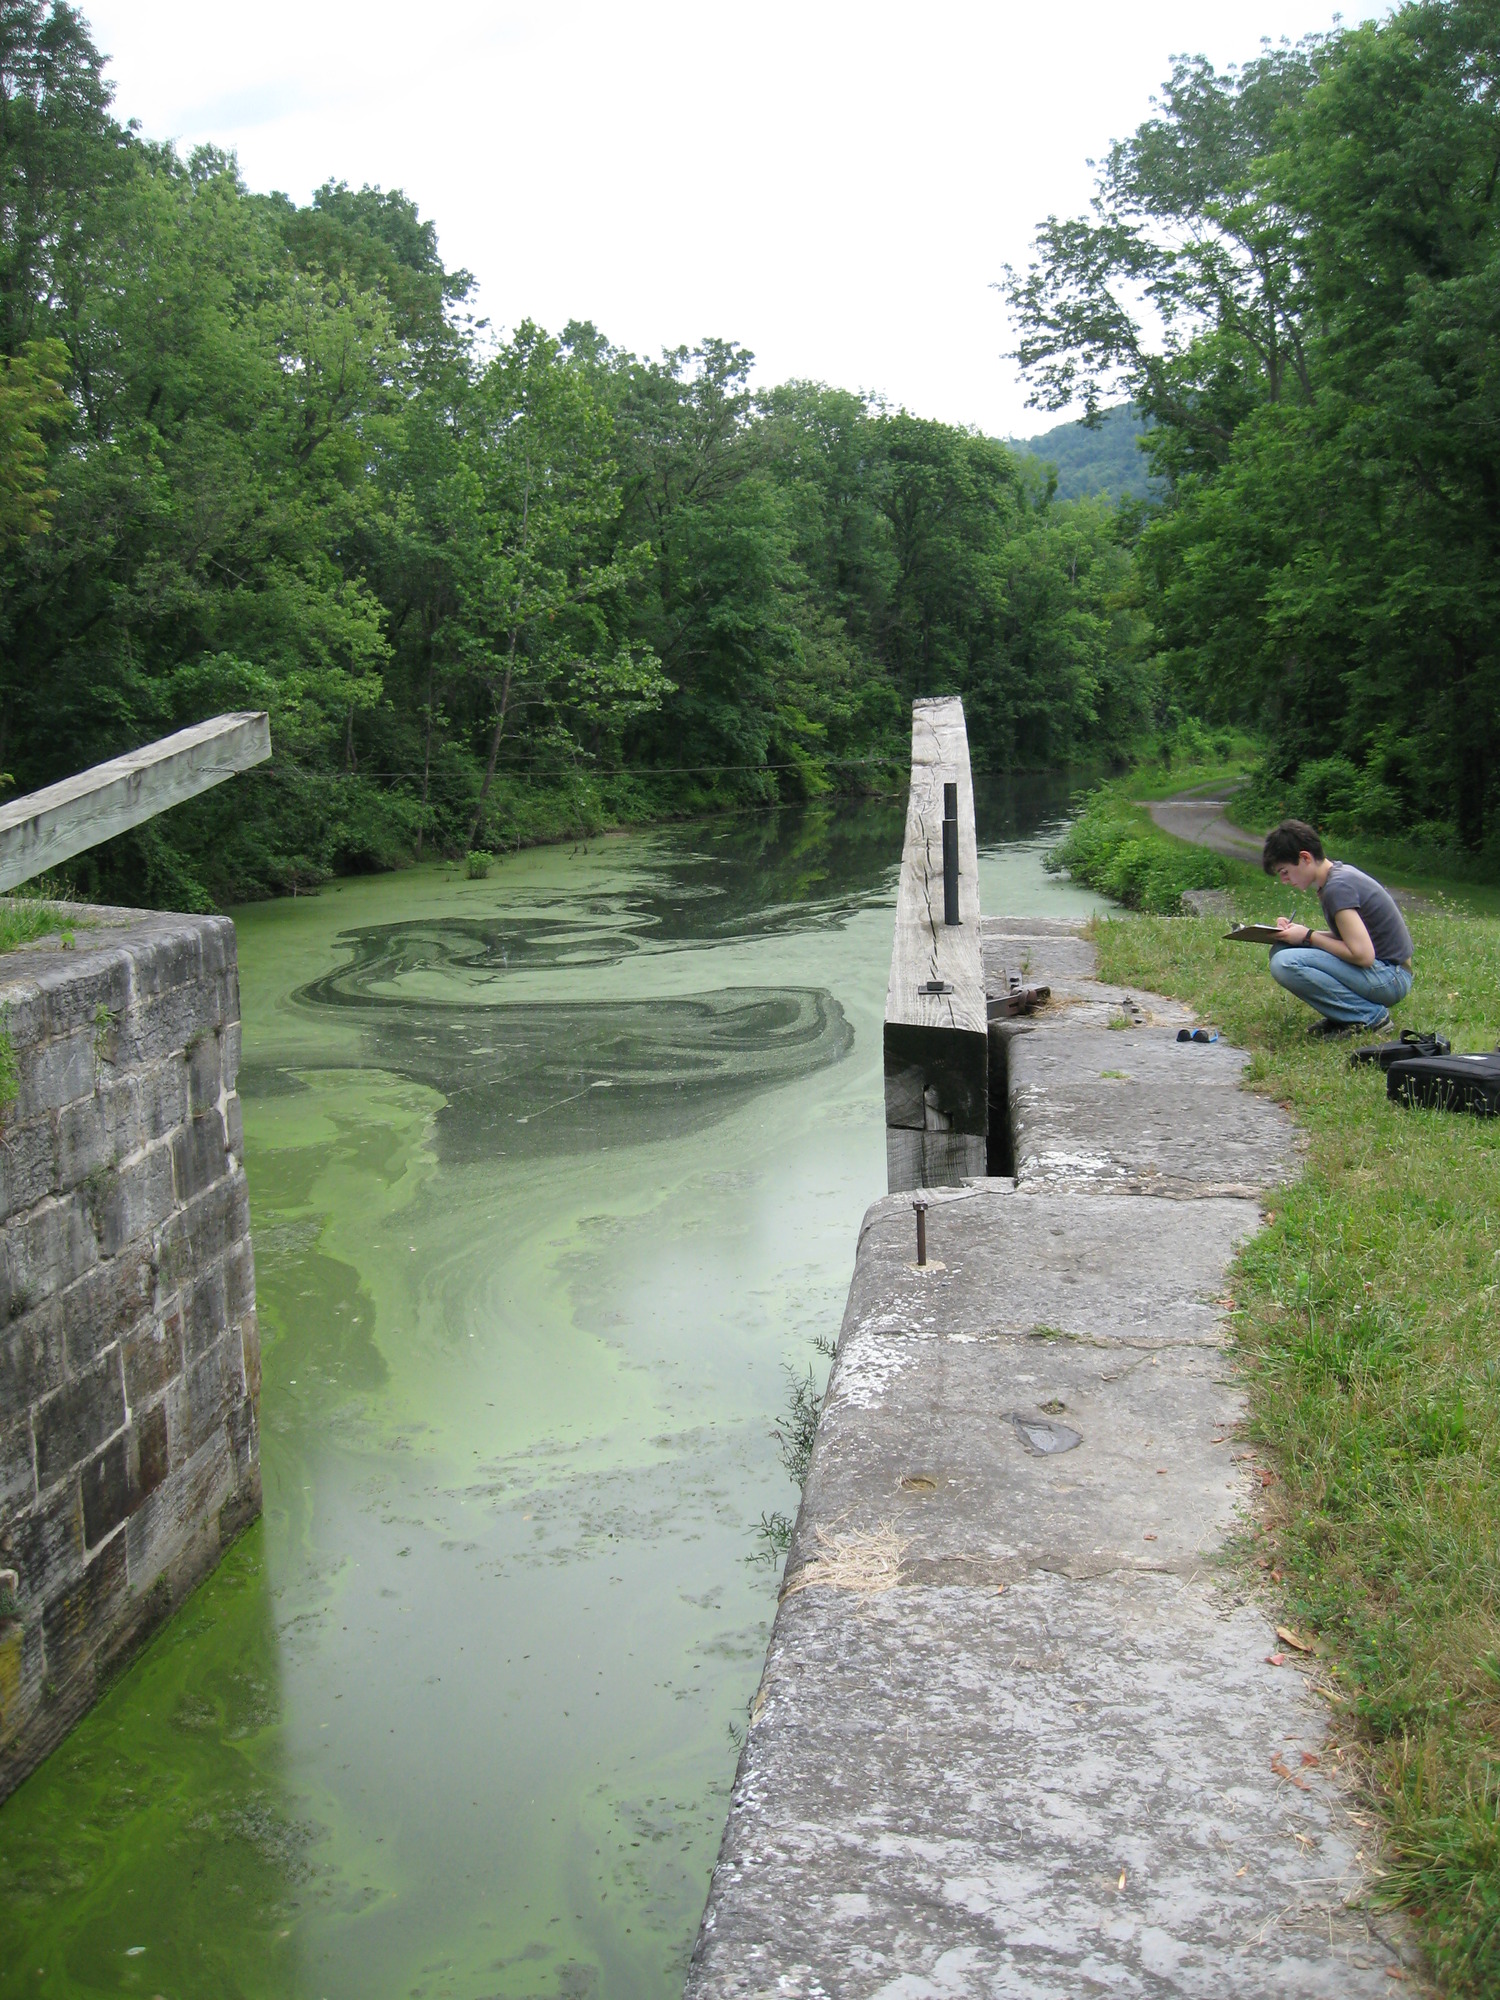 a young woman takes notes while crouching by a canal filled with water and algae.